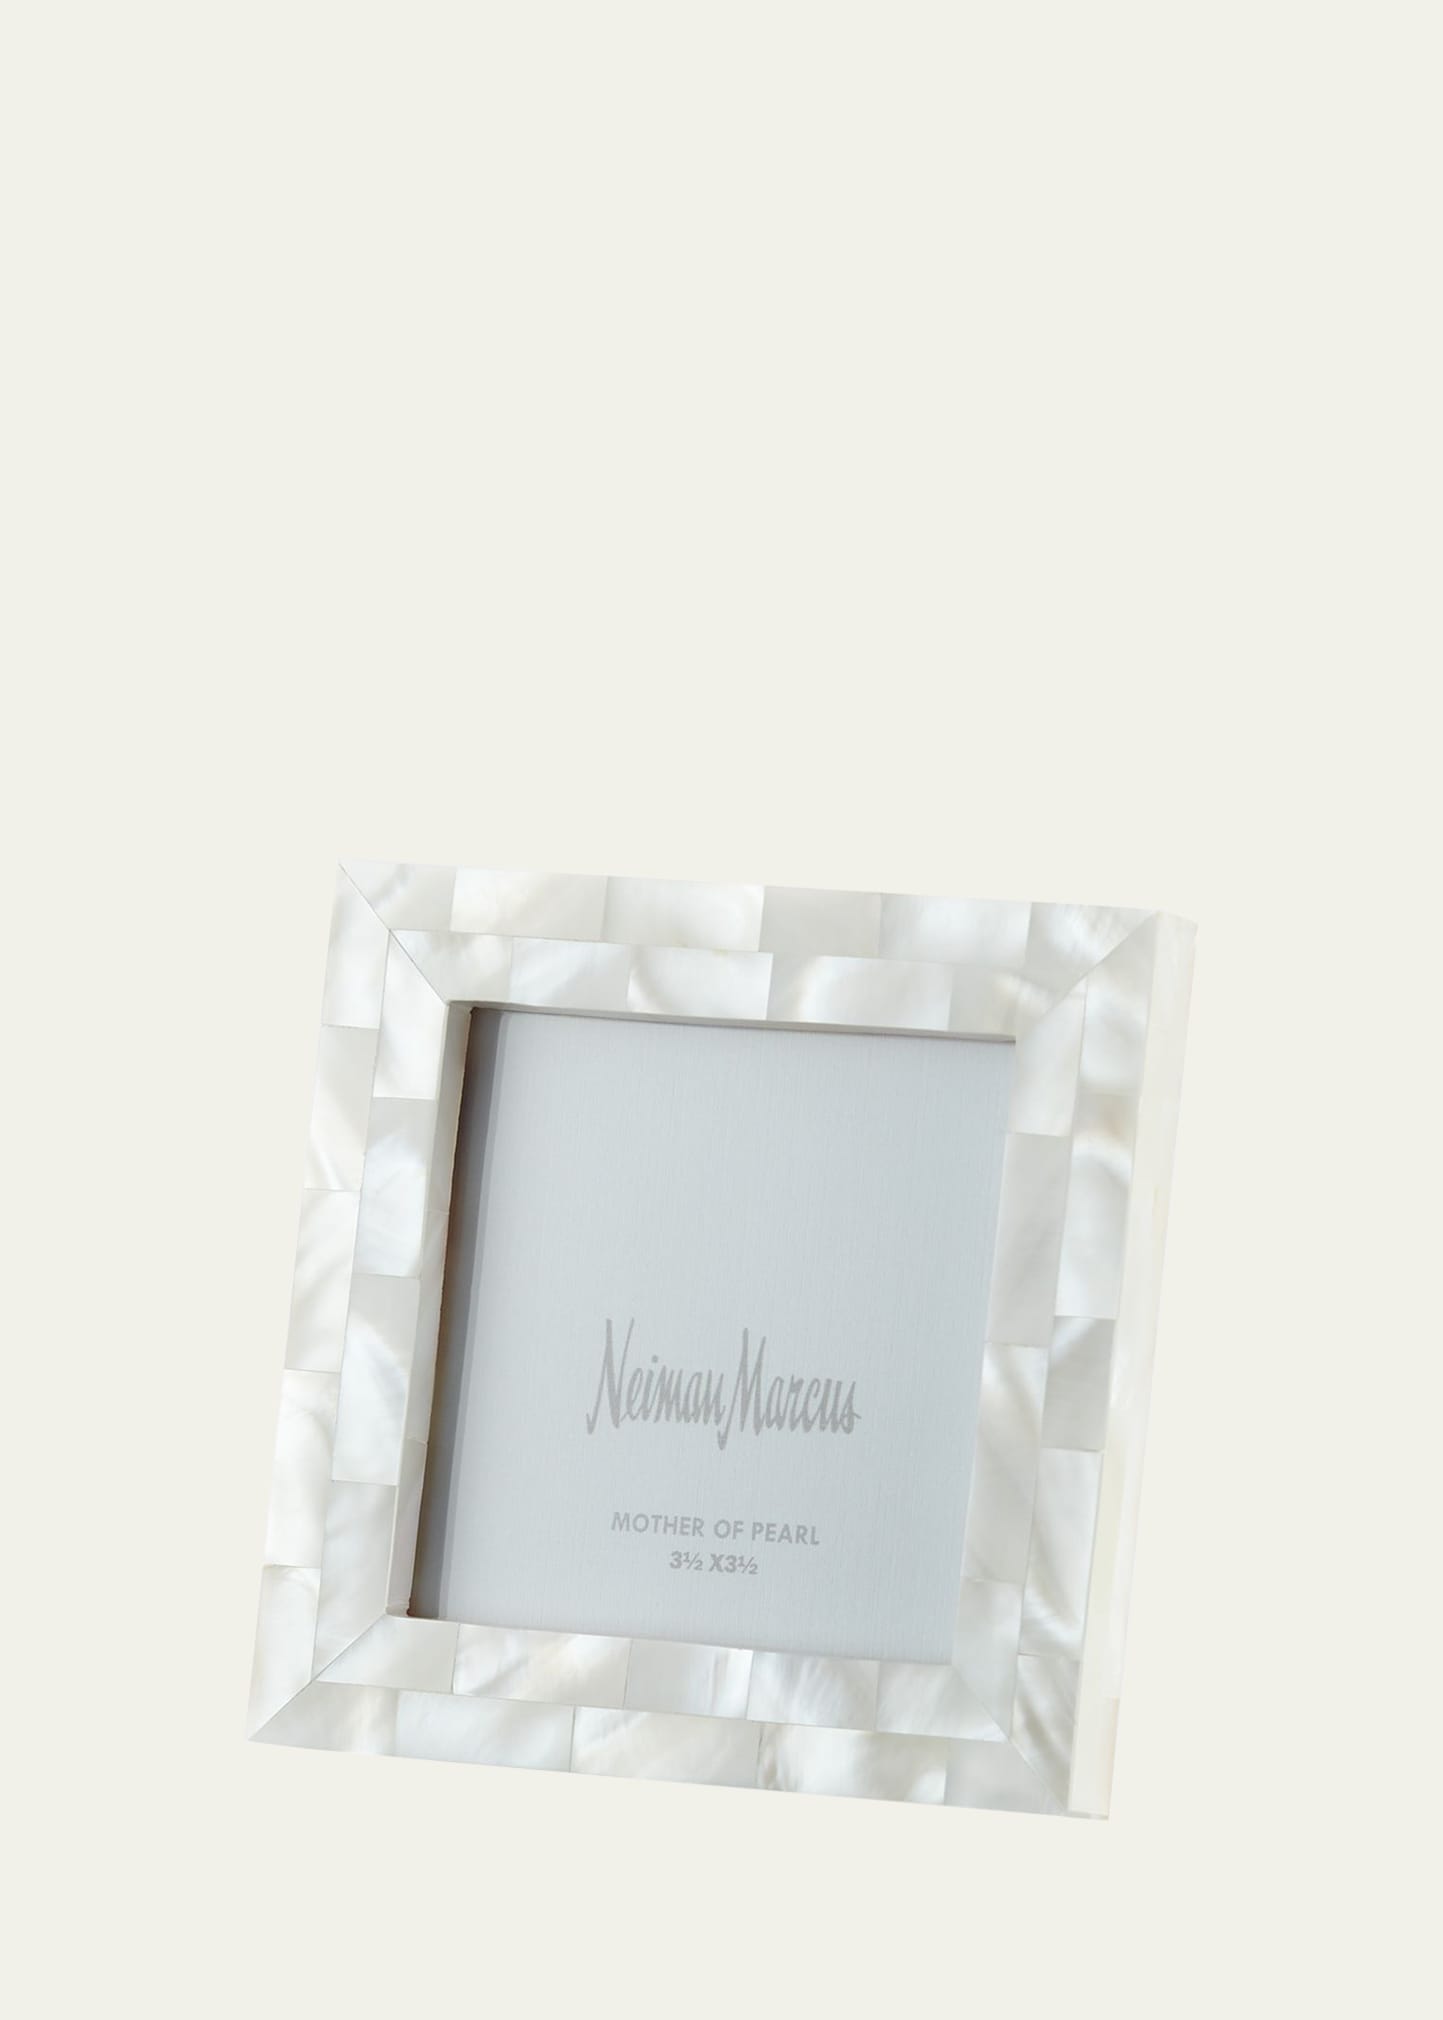 Mother-of-Pearl Picture Frame, White, 3.5" x 3.5"